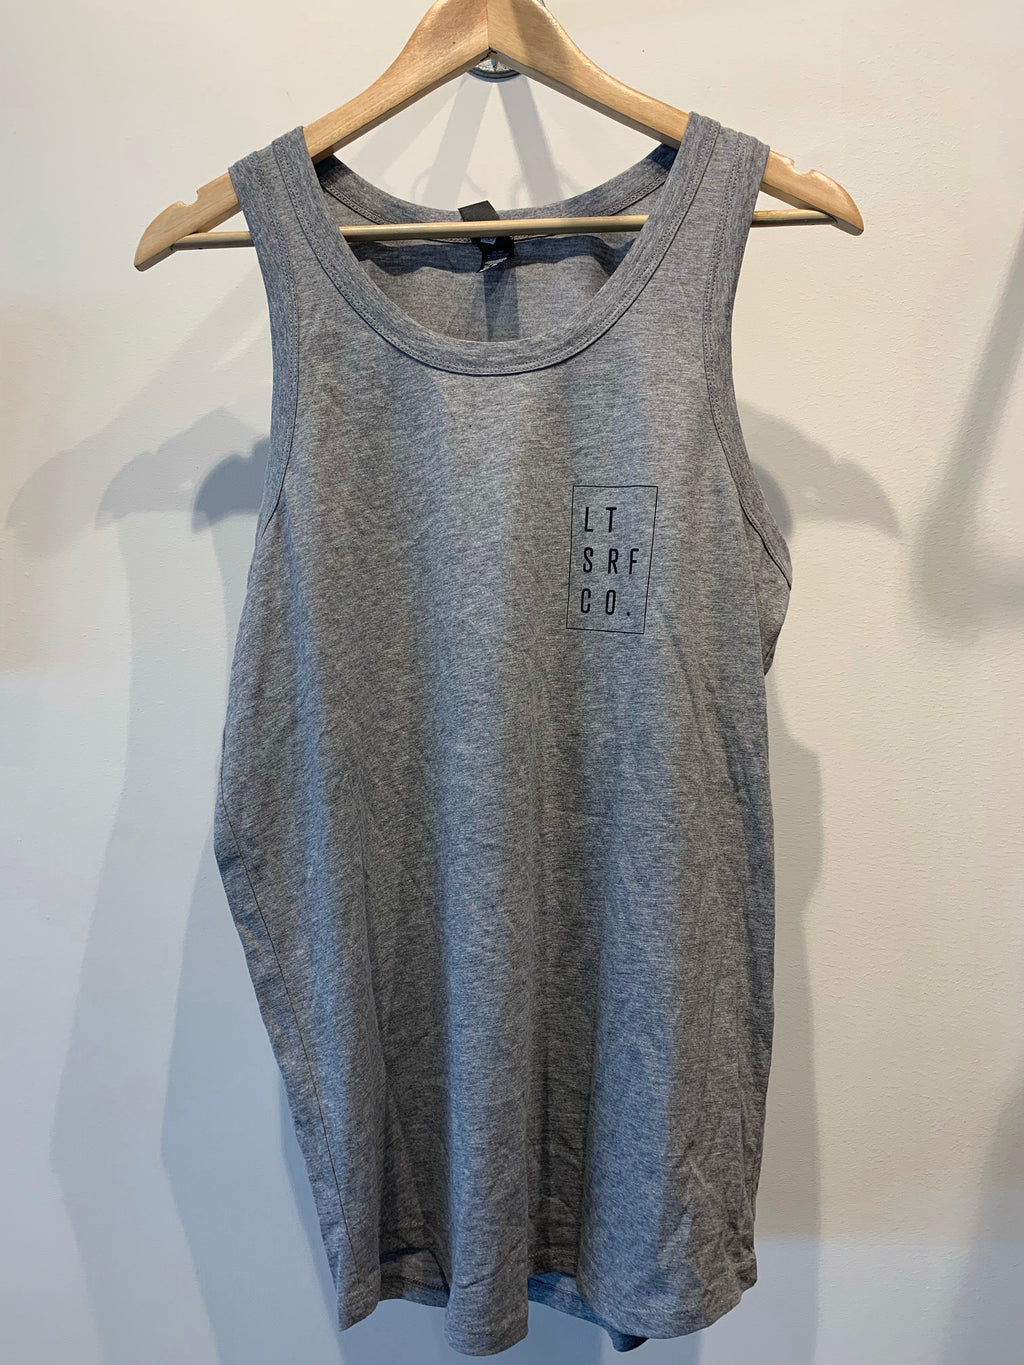 Lawrencetown Surf Co. Authentic Tank Top - Grey / Black